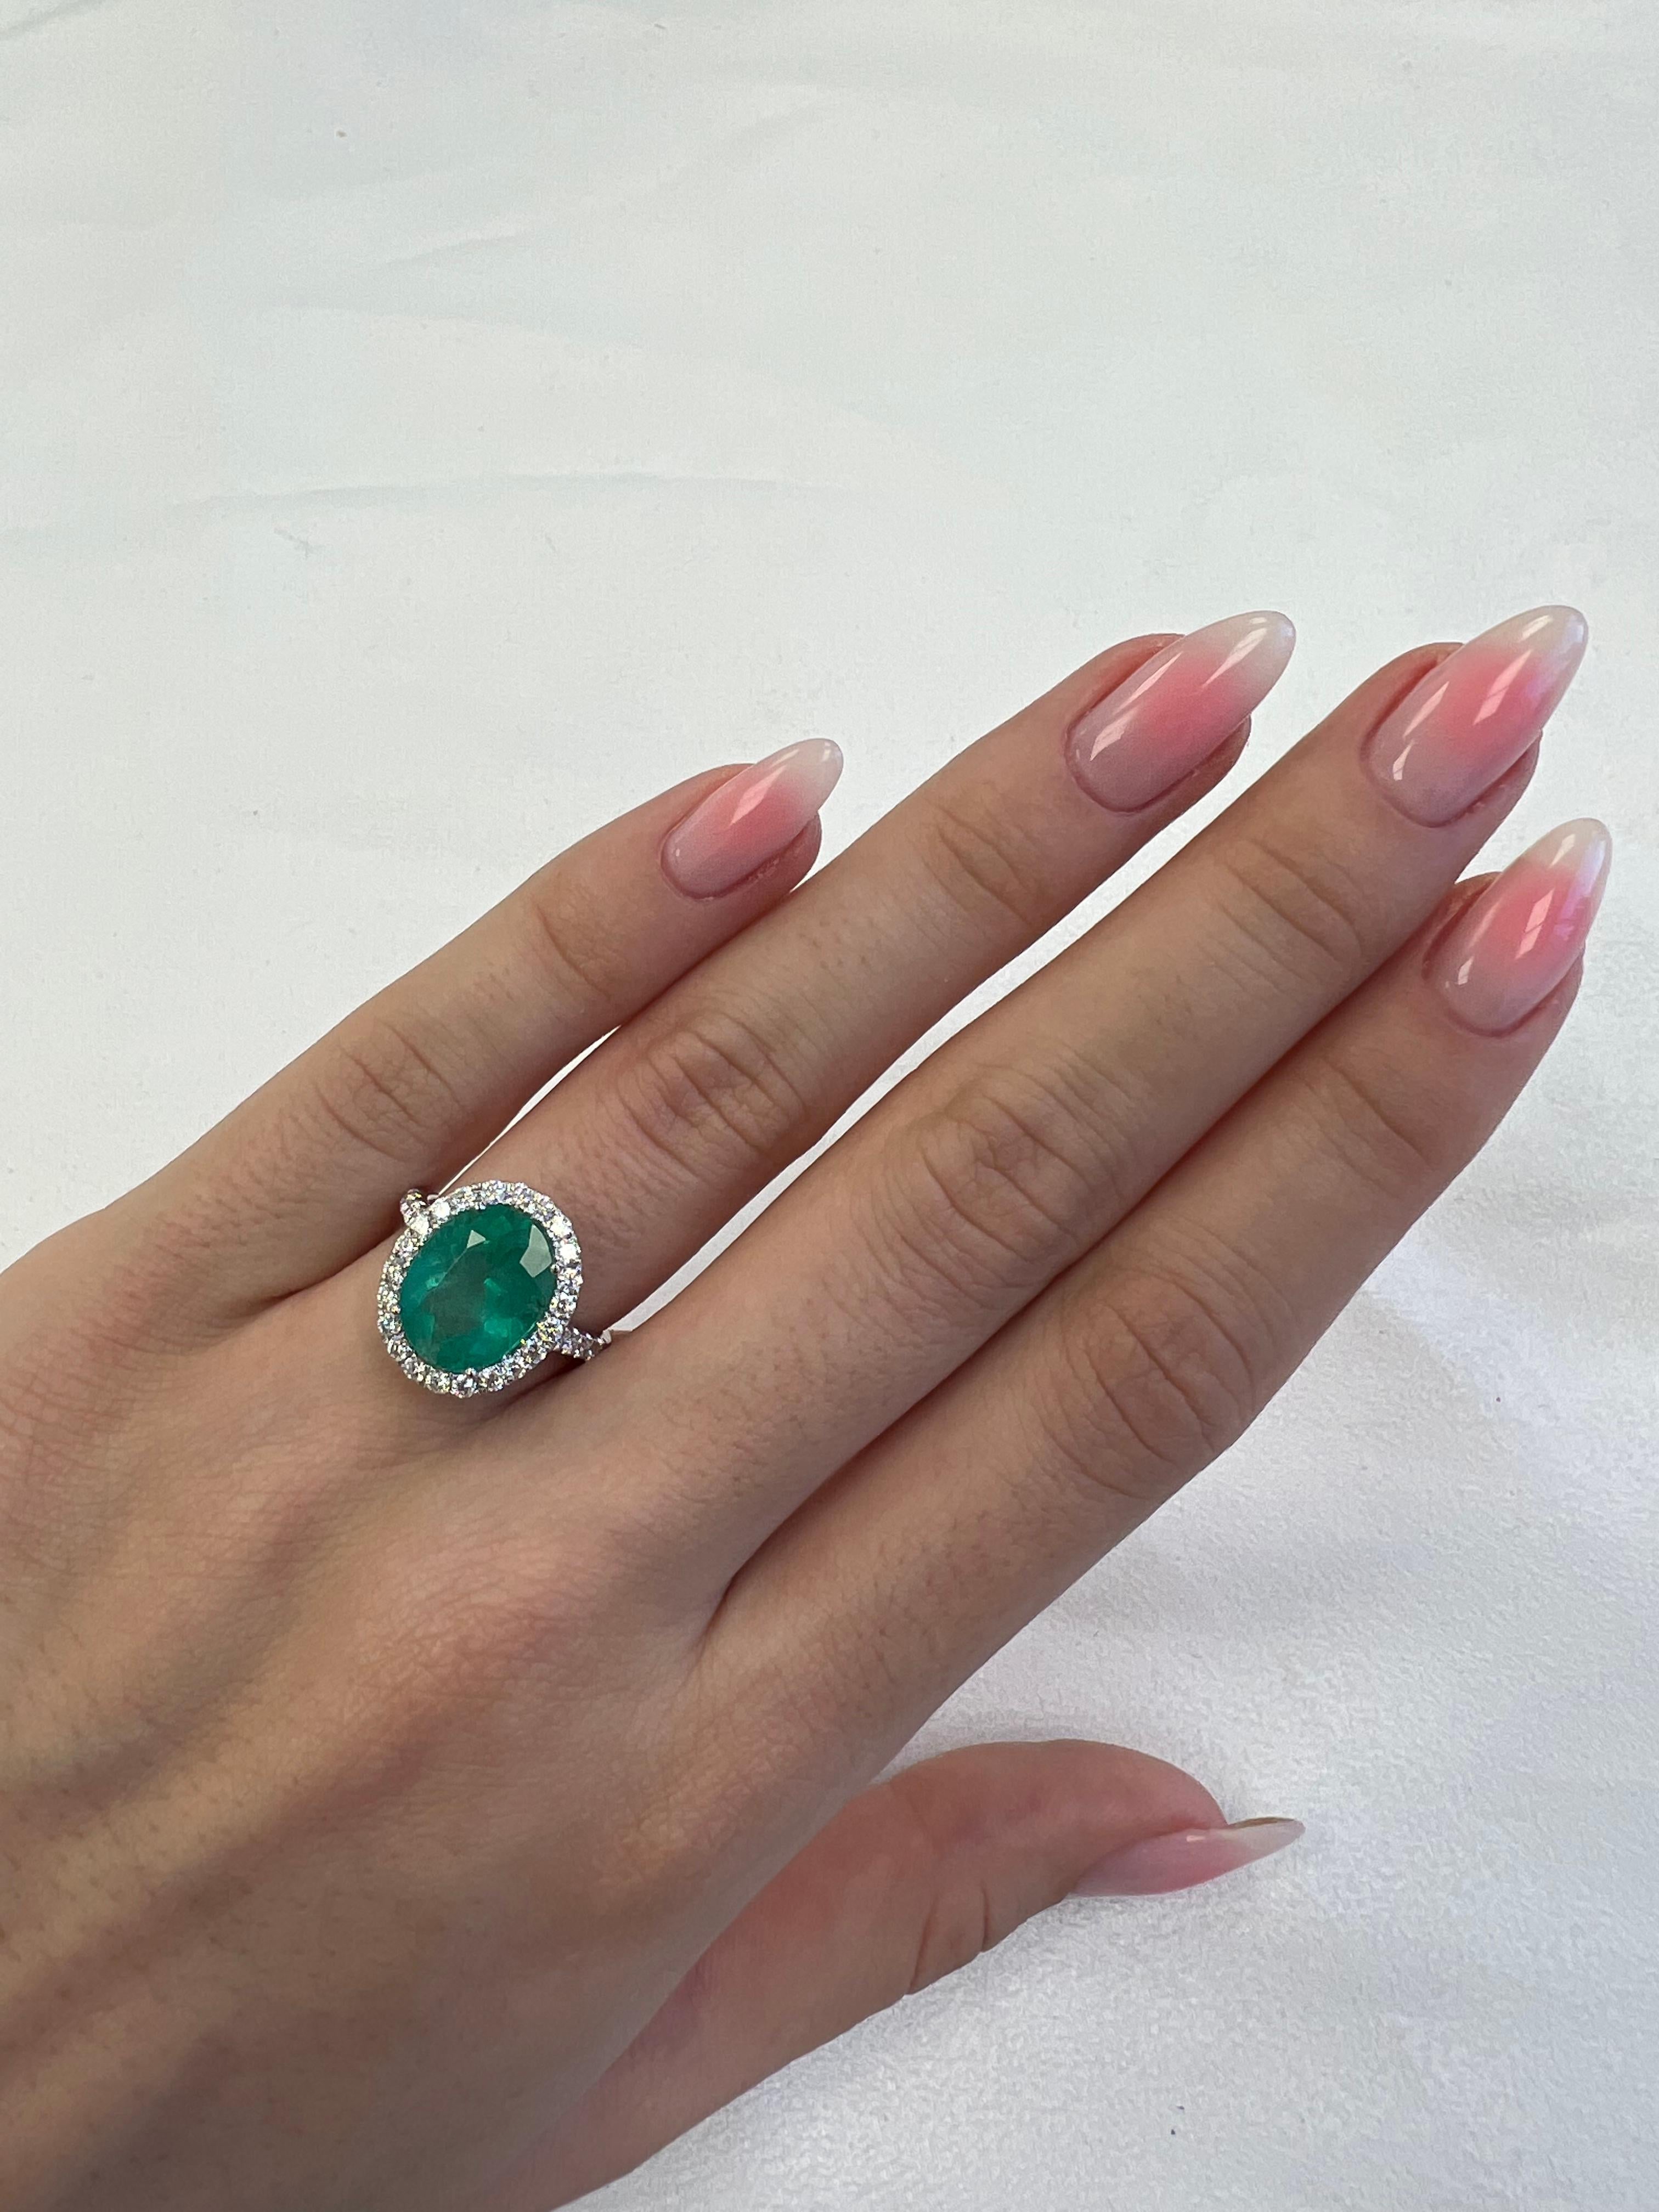 Classic emerald and diamond halo ring, GIA certified. 
4.99 carats total gemstone weight.
4.17 carat oval shape emerald, F1, GIA certified. Complimented by 34 round brilliant diamonds, 0.82 carats, F/G color and VS clarity. 18k white gold, 5.12